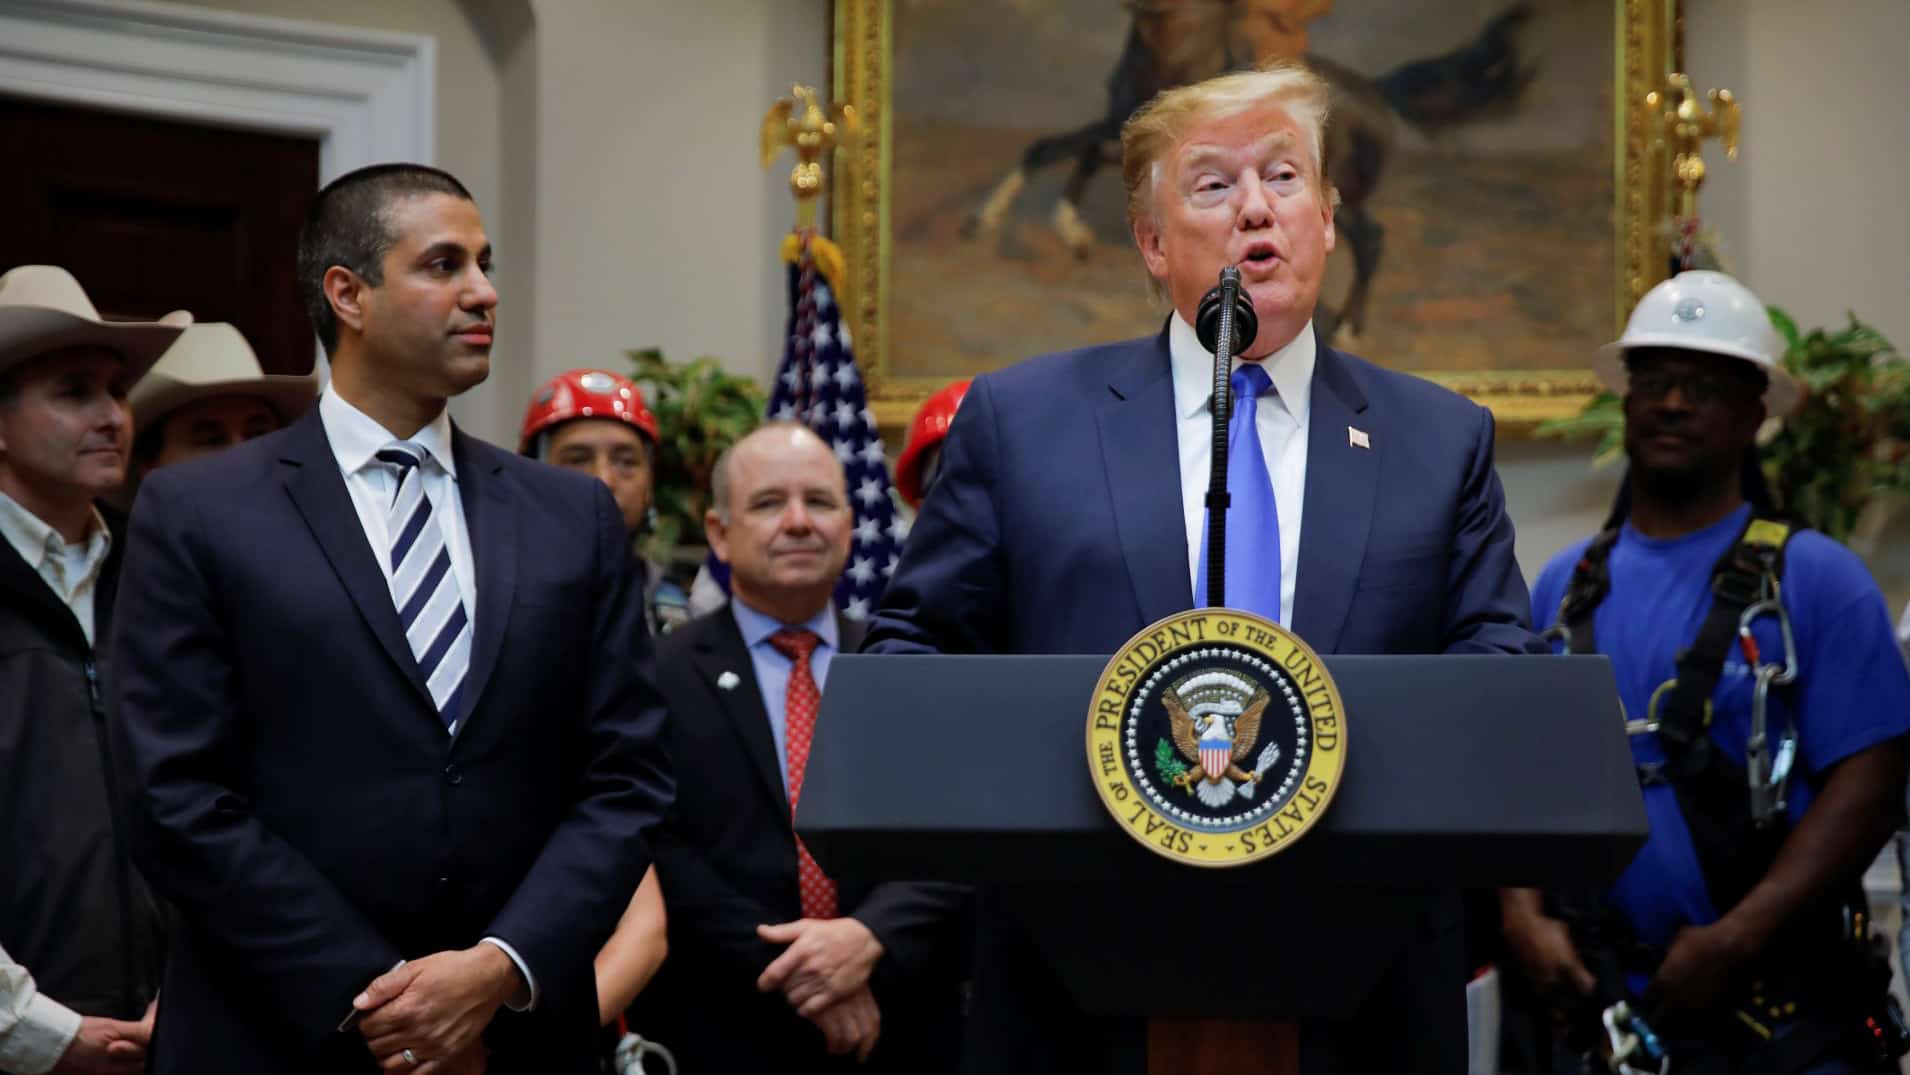 President Donald Trump standing at a press podium next to FCC chairman Ajit Pai as Trump delivers a speech about 5G plans for the United States.